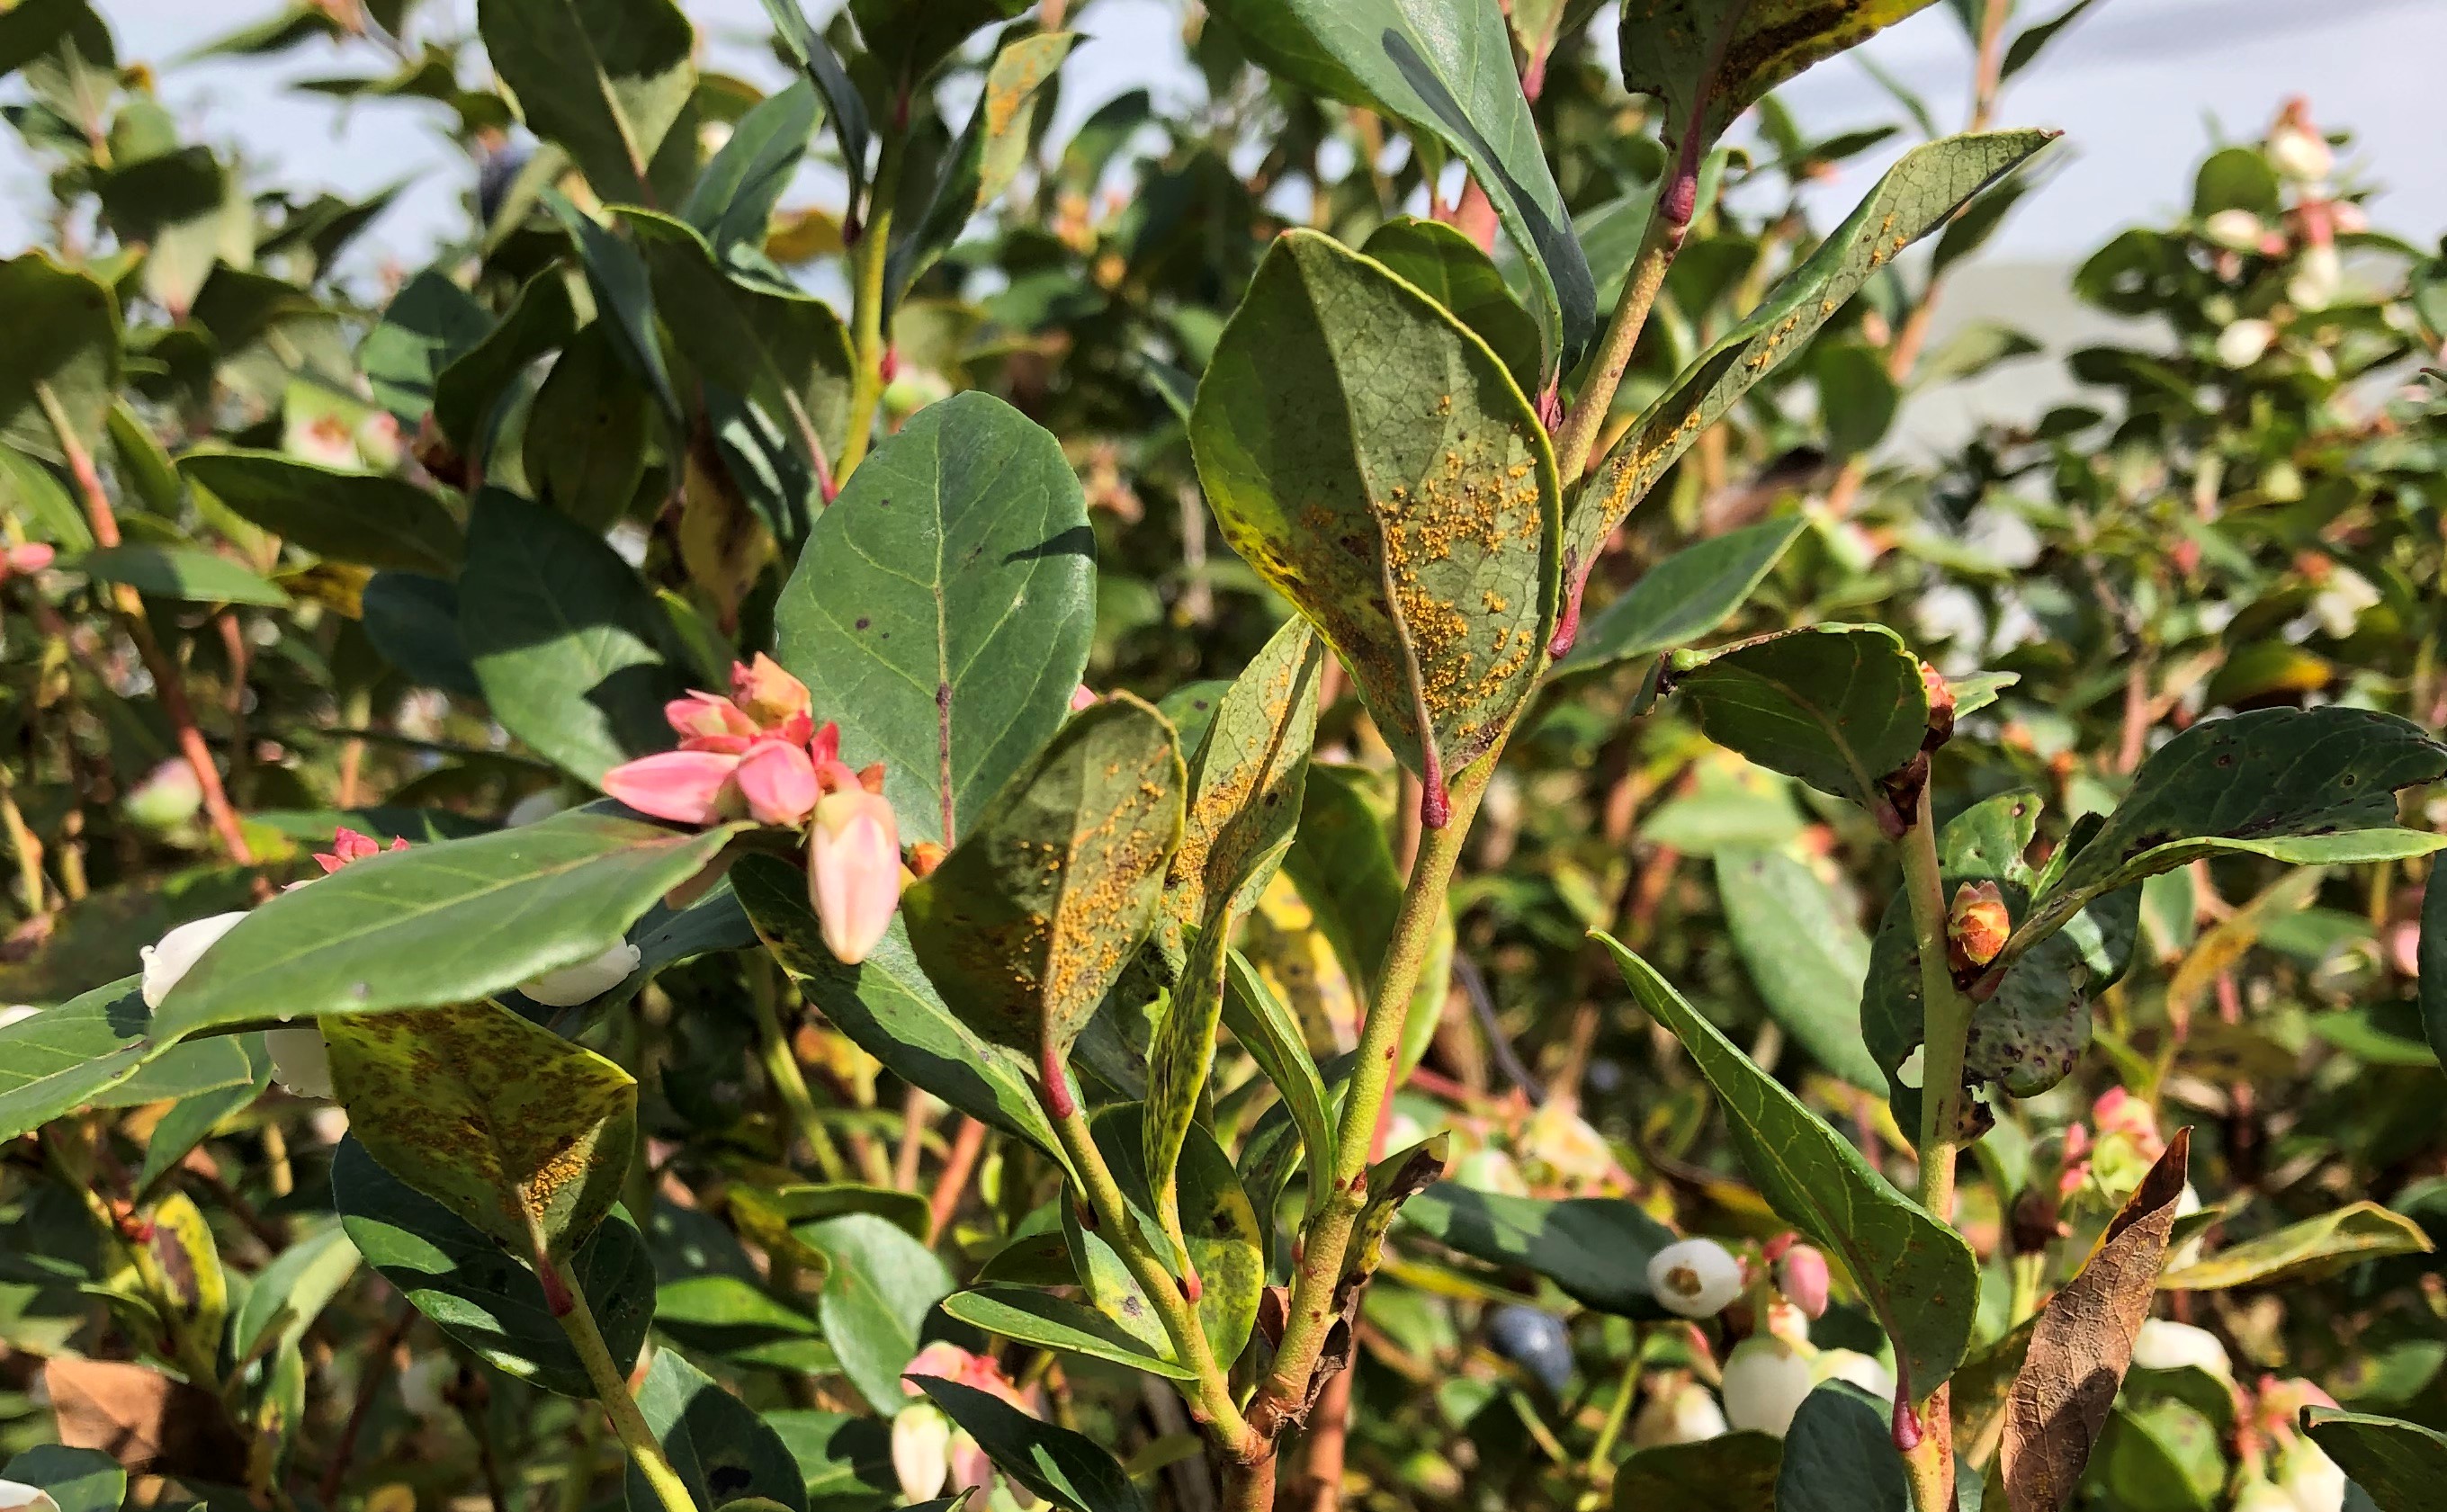 Close-up photo of leaves on a blueberry bush. The leaves show blueberry rust pustules on the underside of the leaves.  